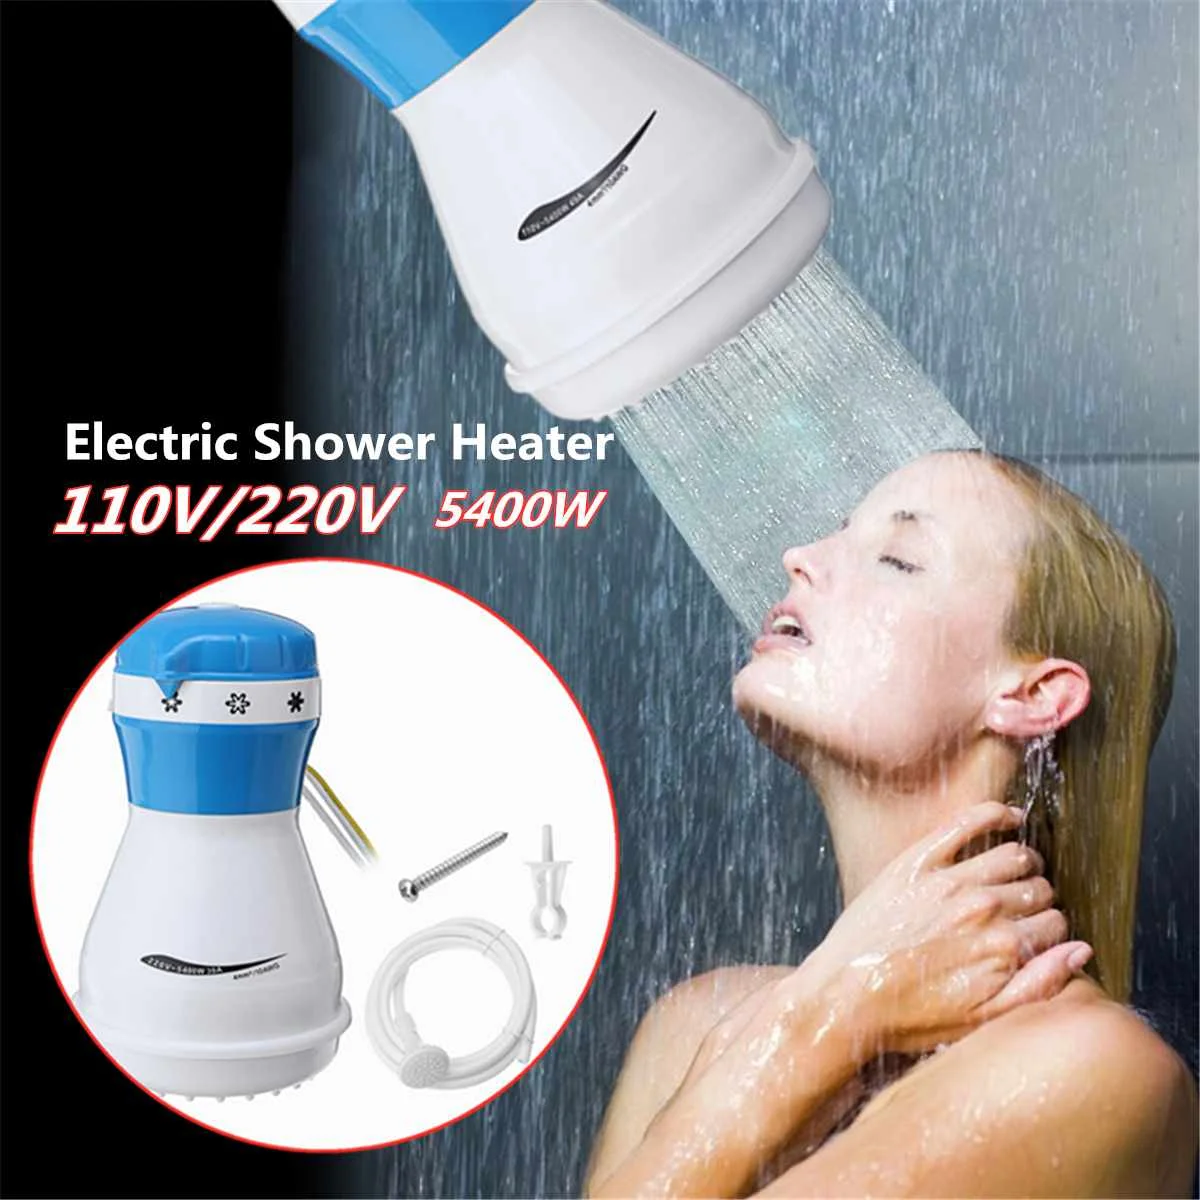 

5400W Electric Heaters With Shower Head Instant Water Heater 110V/220V Non impounding Heaters Electric Water Heating for Bath